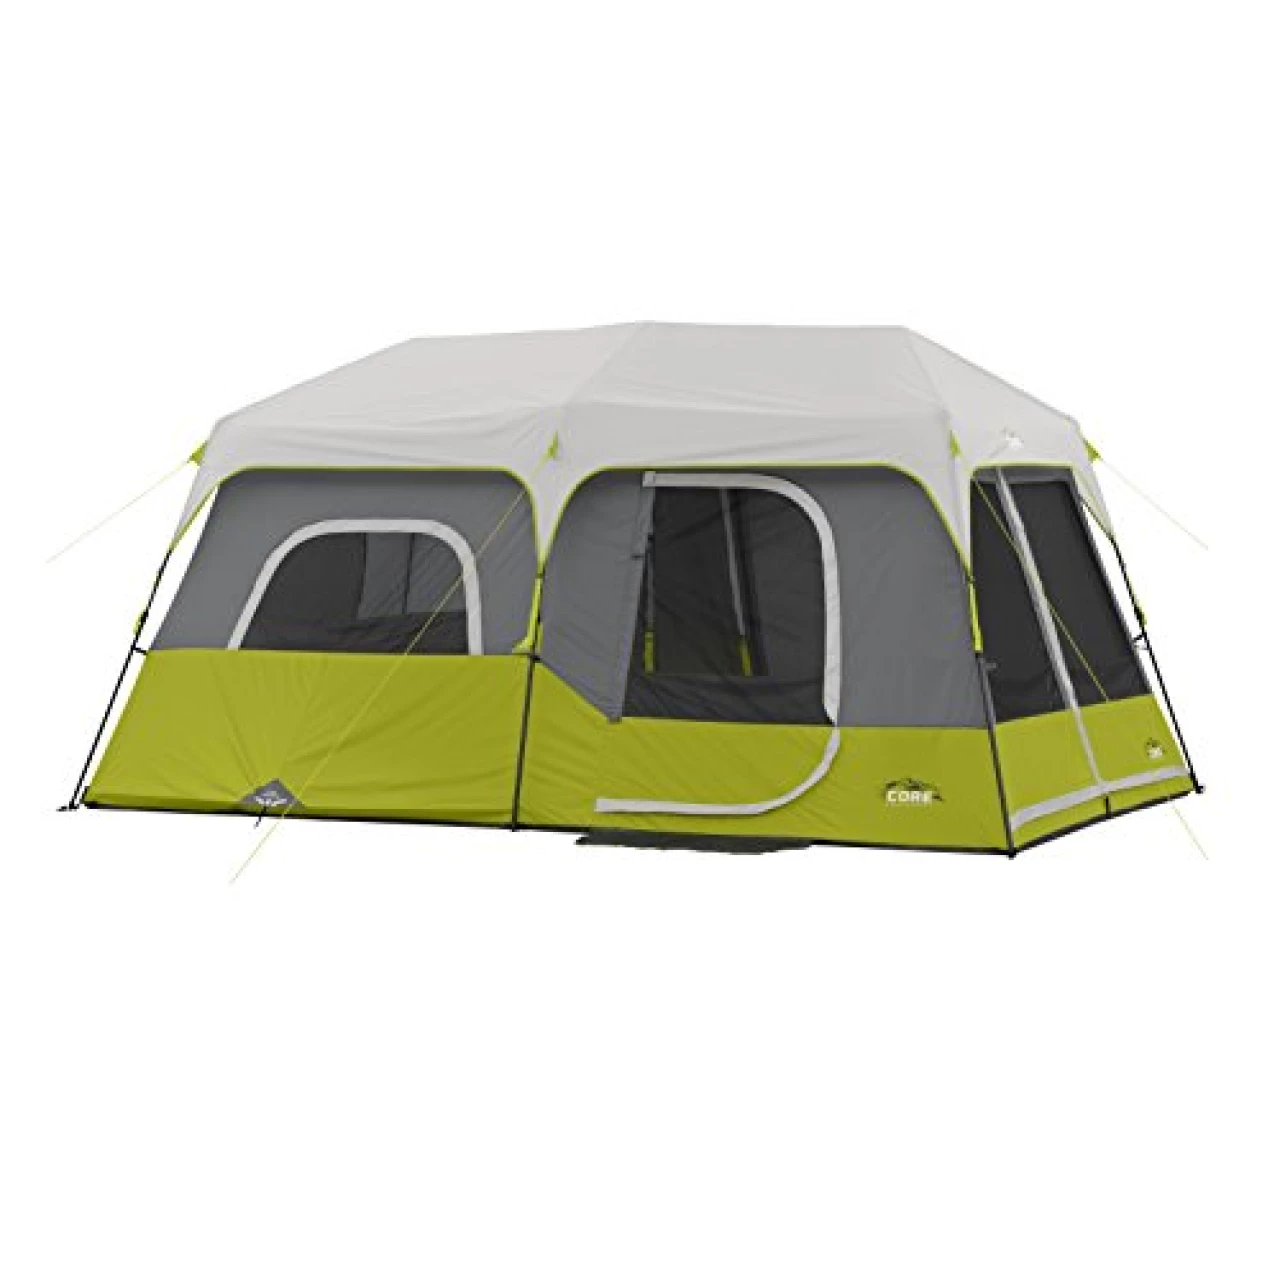 CORE Instant Cabin Tent | Multi Room Tent for Family with Storage Pockets for Camping Accessories | Portable Large Pop Up Tent for 2 Minute Camp Setup | Sleeps 9 People, 14&rsquo; x 9&rsquo;